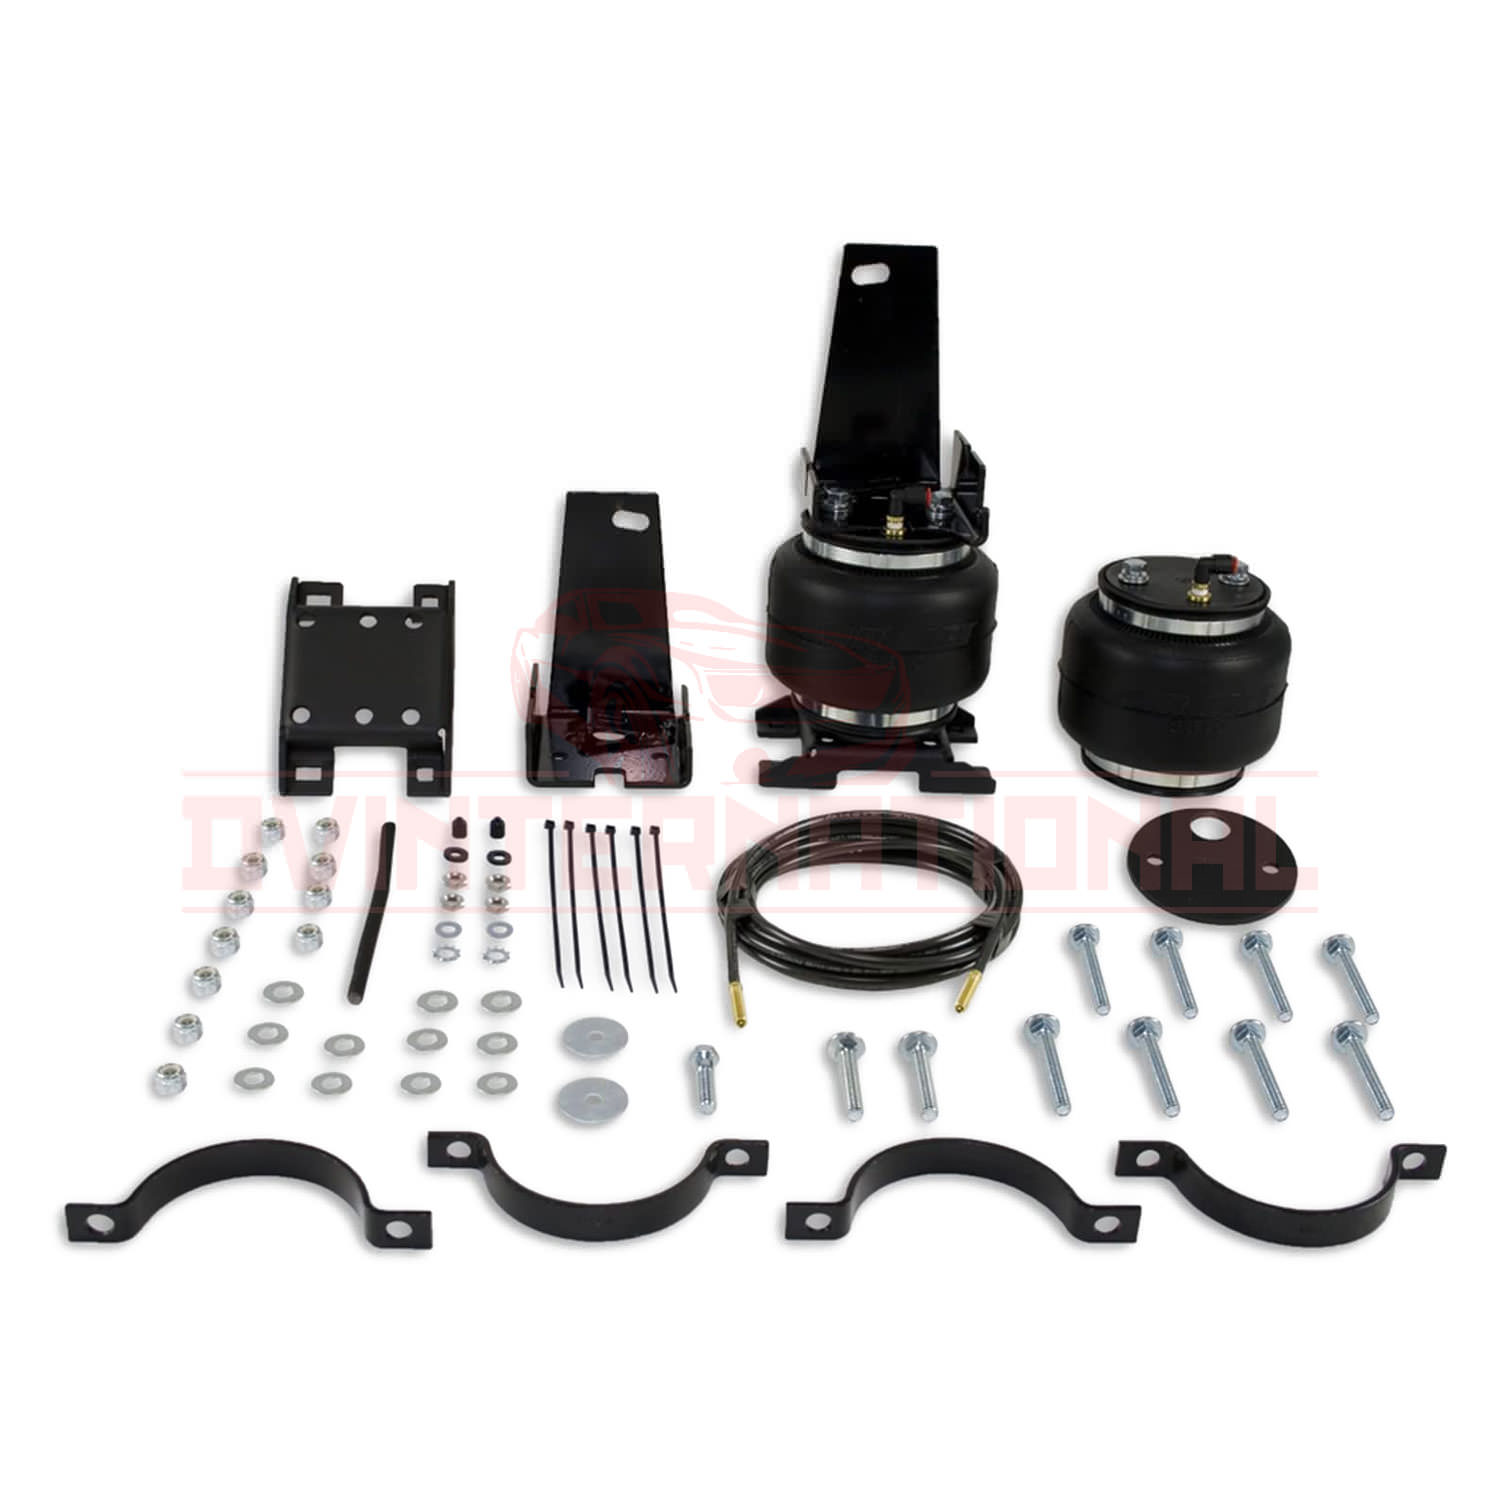 AirLift SPRING KIT 5000 for FORD EXCURSION Rear Wheel Drive 2000-2004